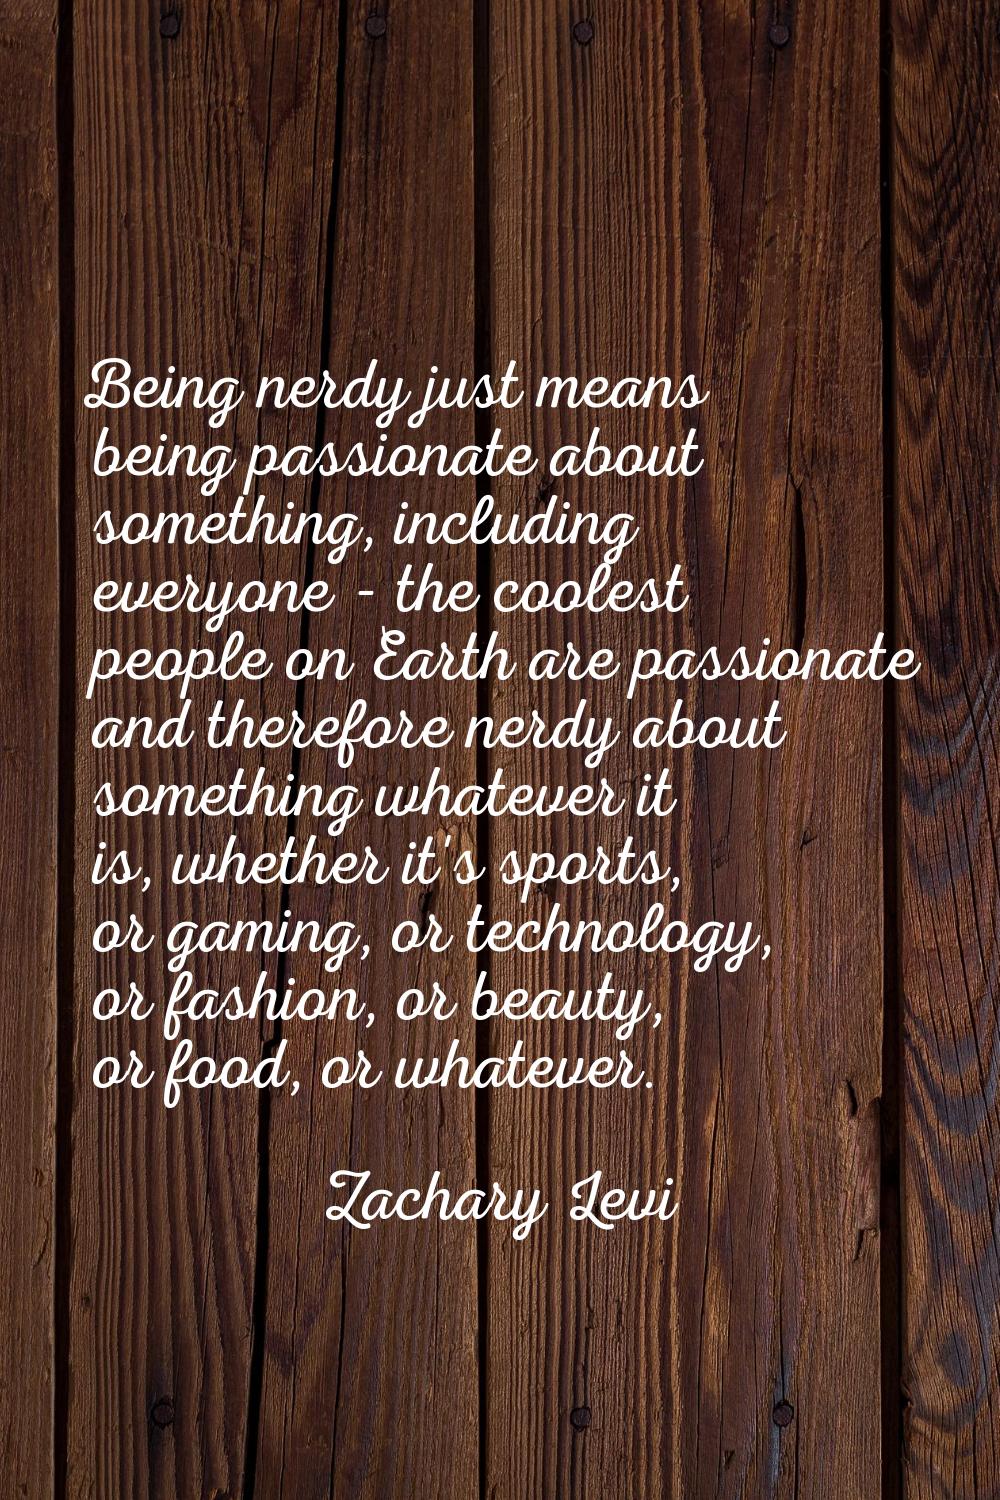 Being nerdy just means being passionate about something, including everyone - the coolest people on